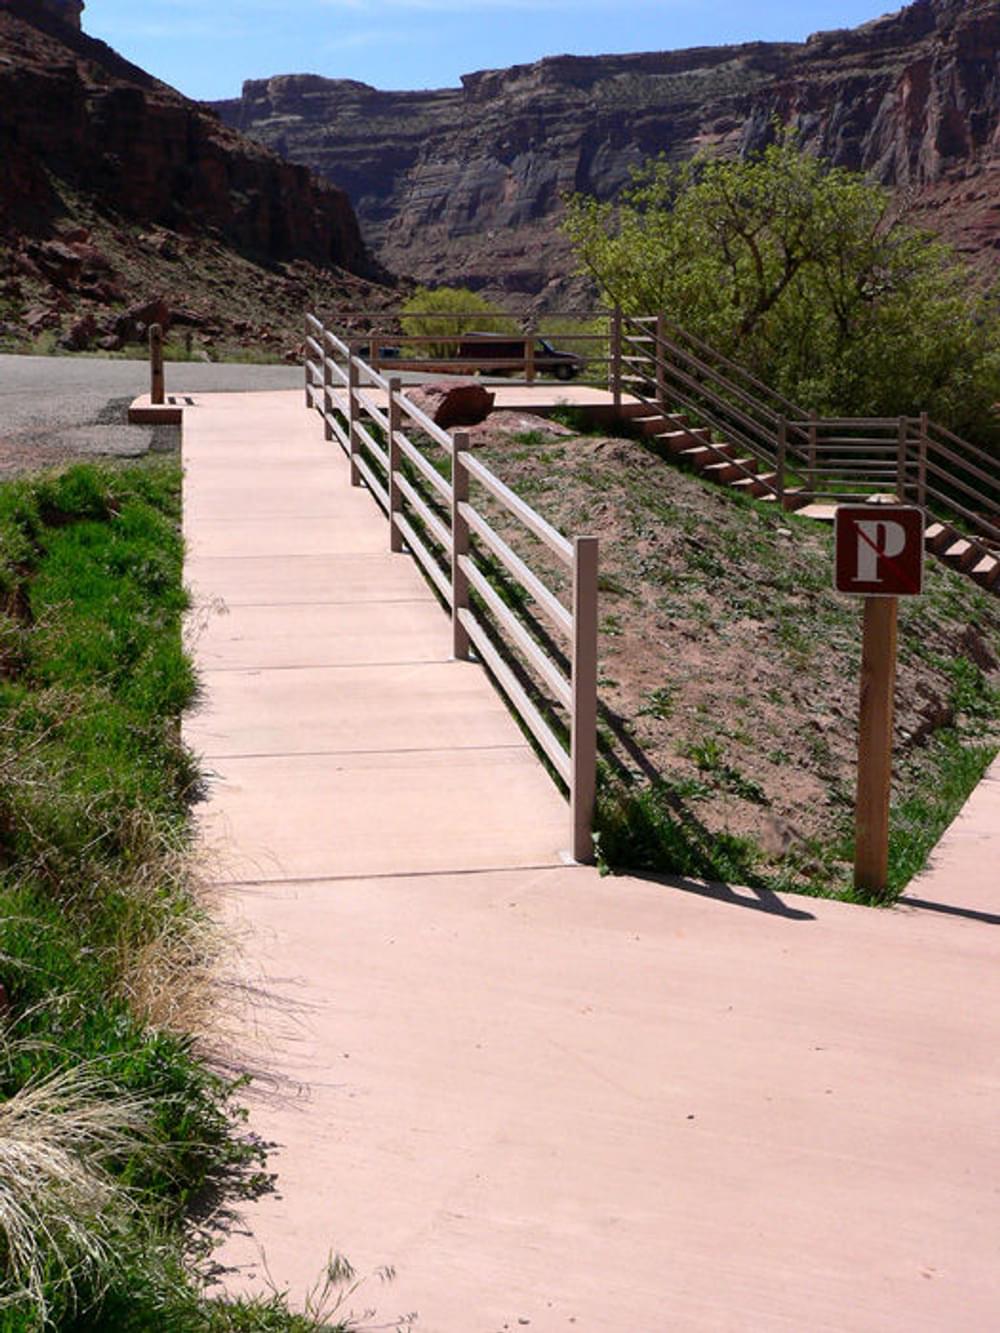 Concrete trail to restrooms with alternative stairs. Note handrail on one side of the trail.